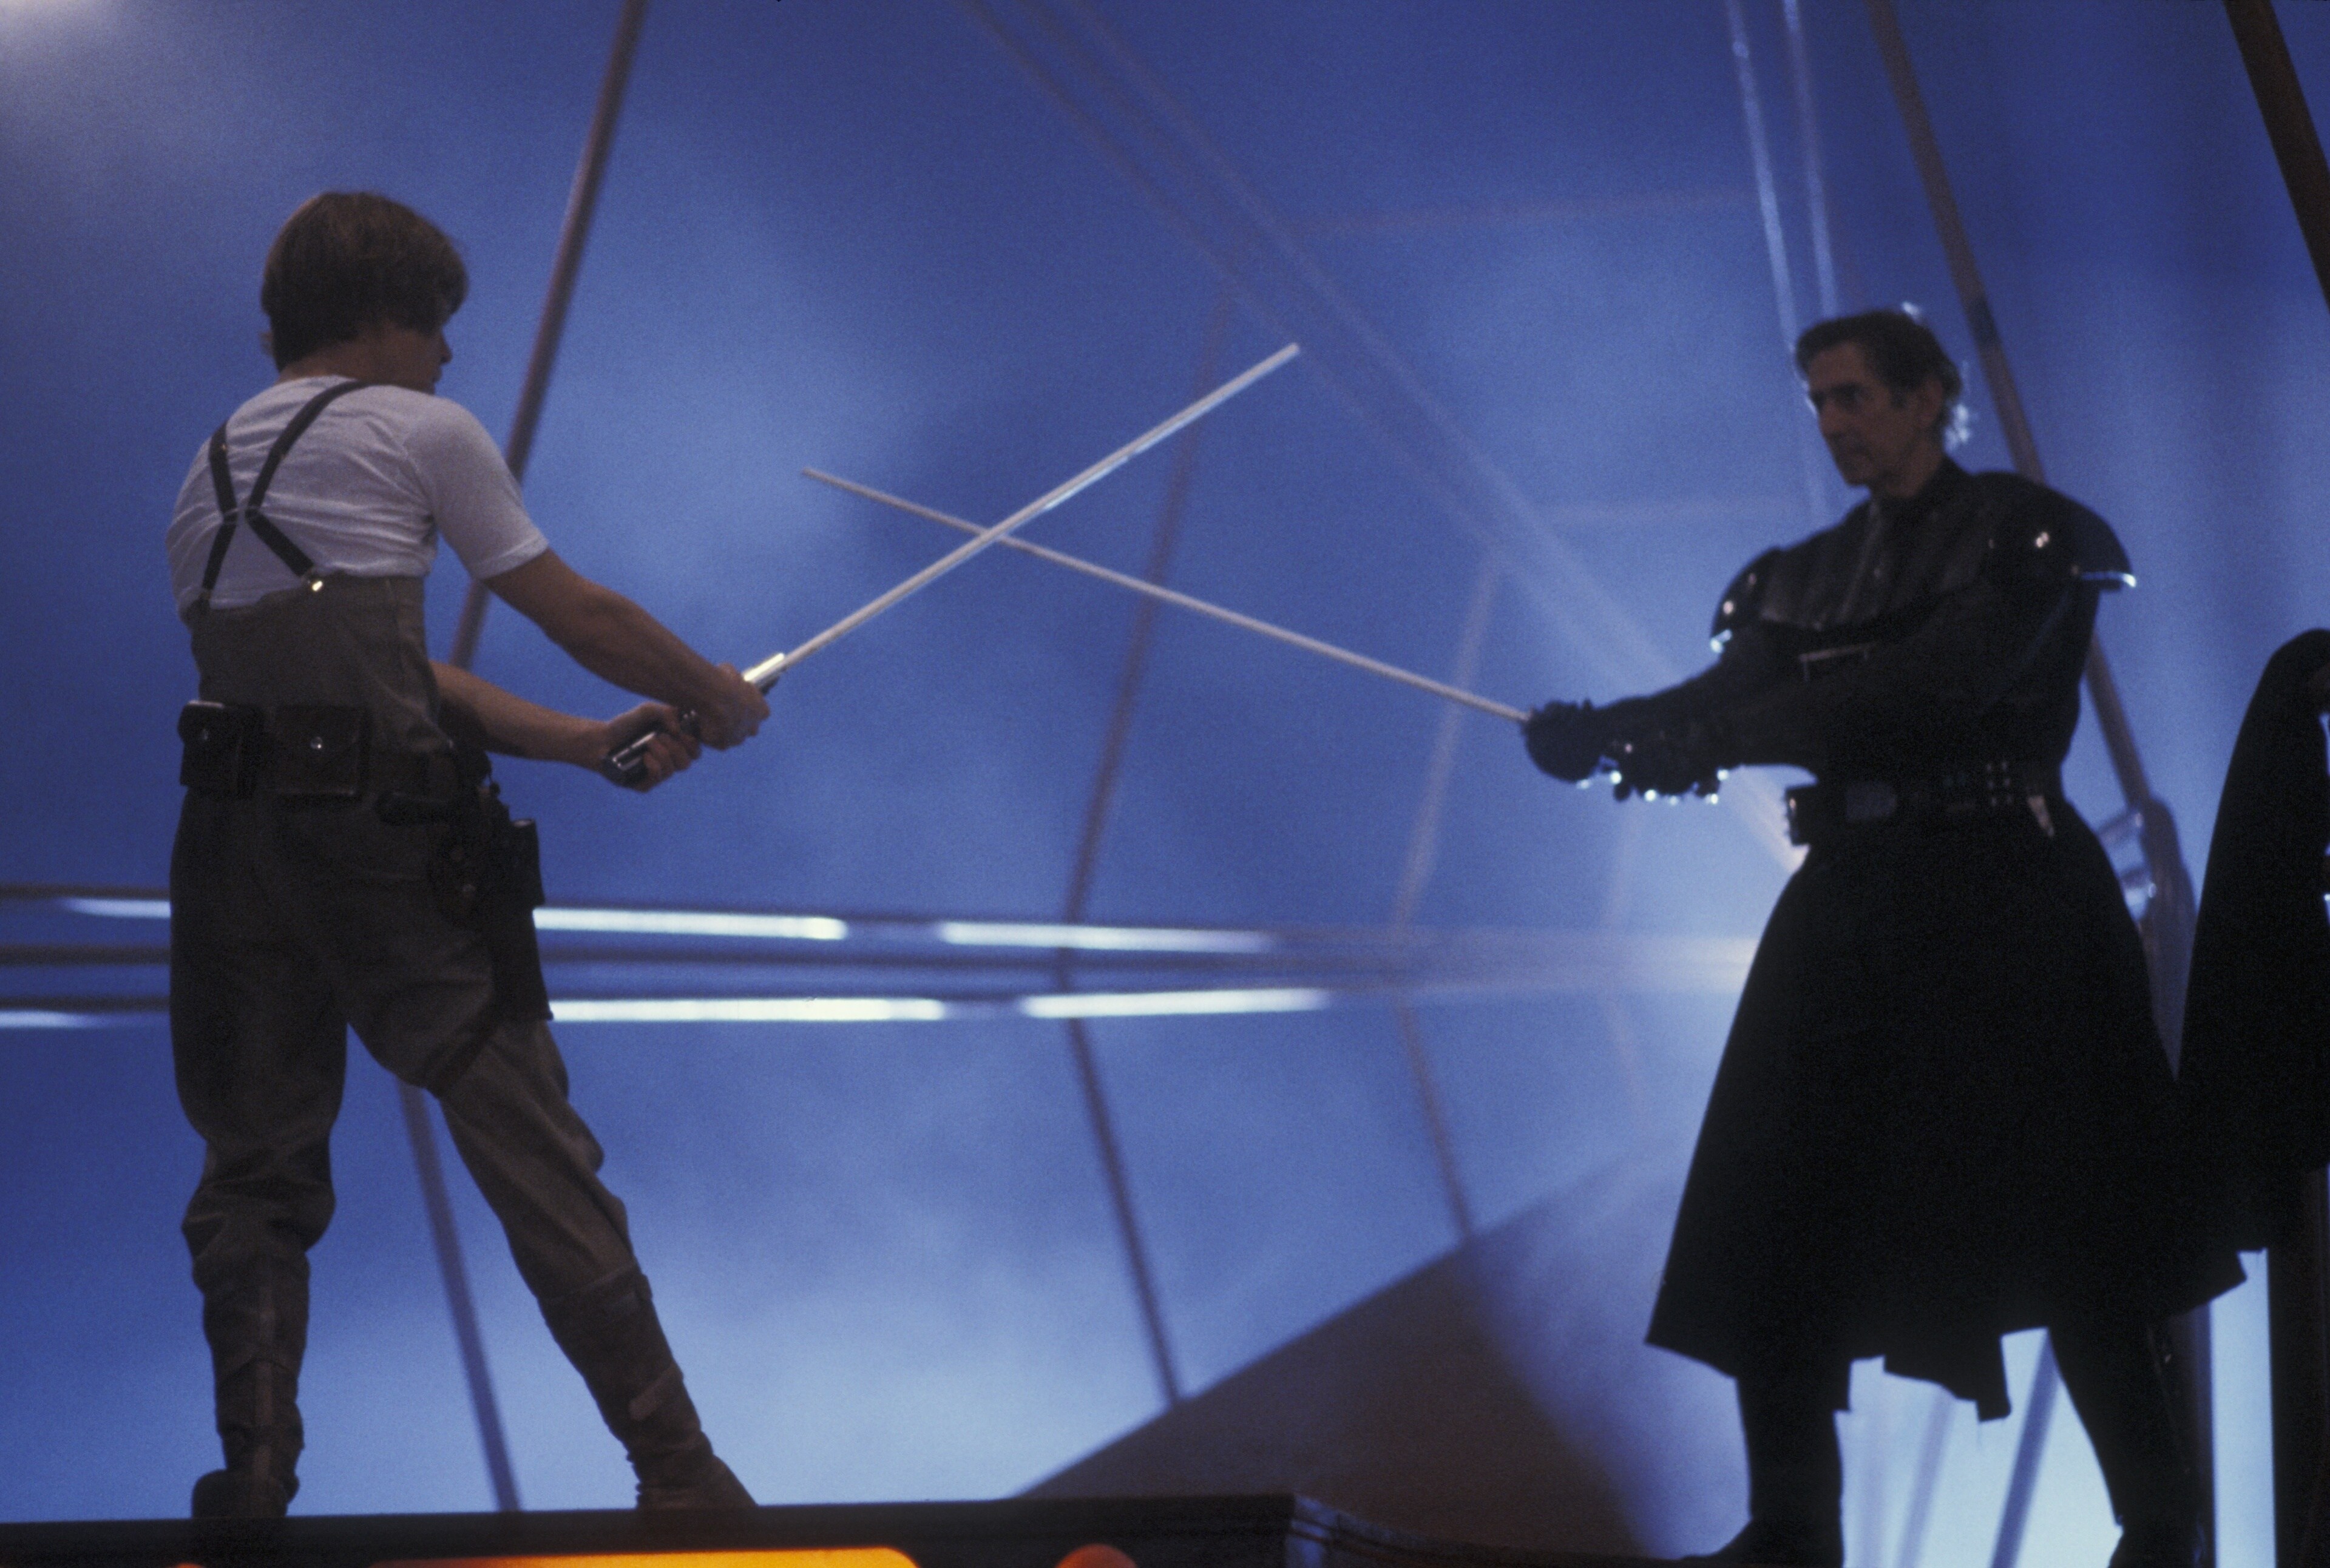 Mark Hamill and David Prowse rehearse for the duel between Luke Skywalker and Darth Vader.